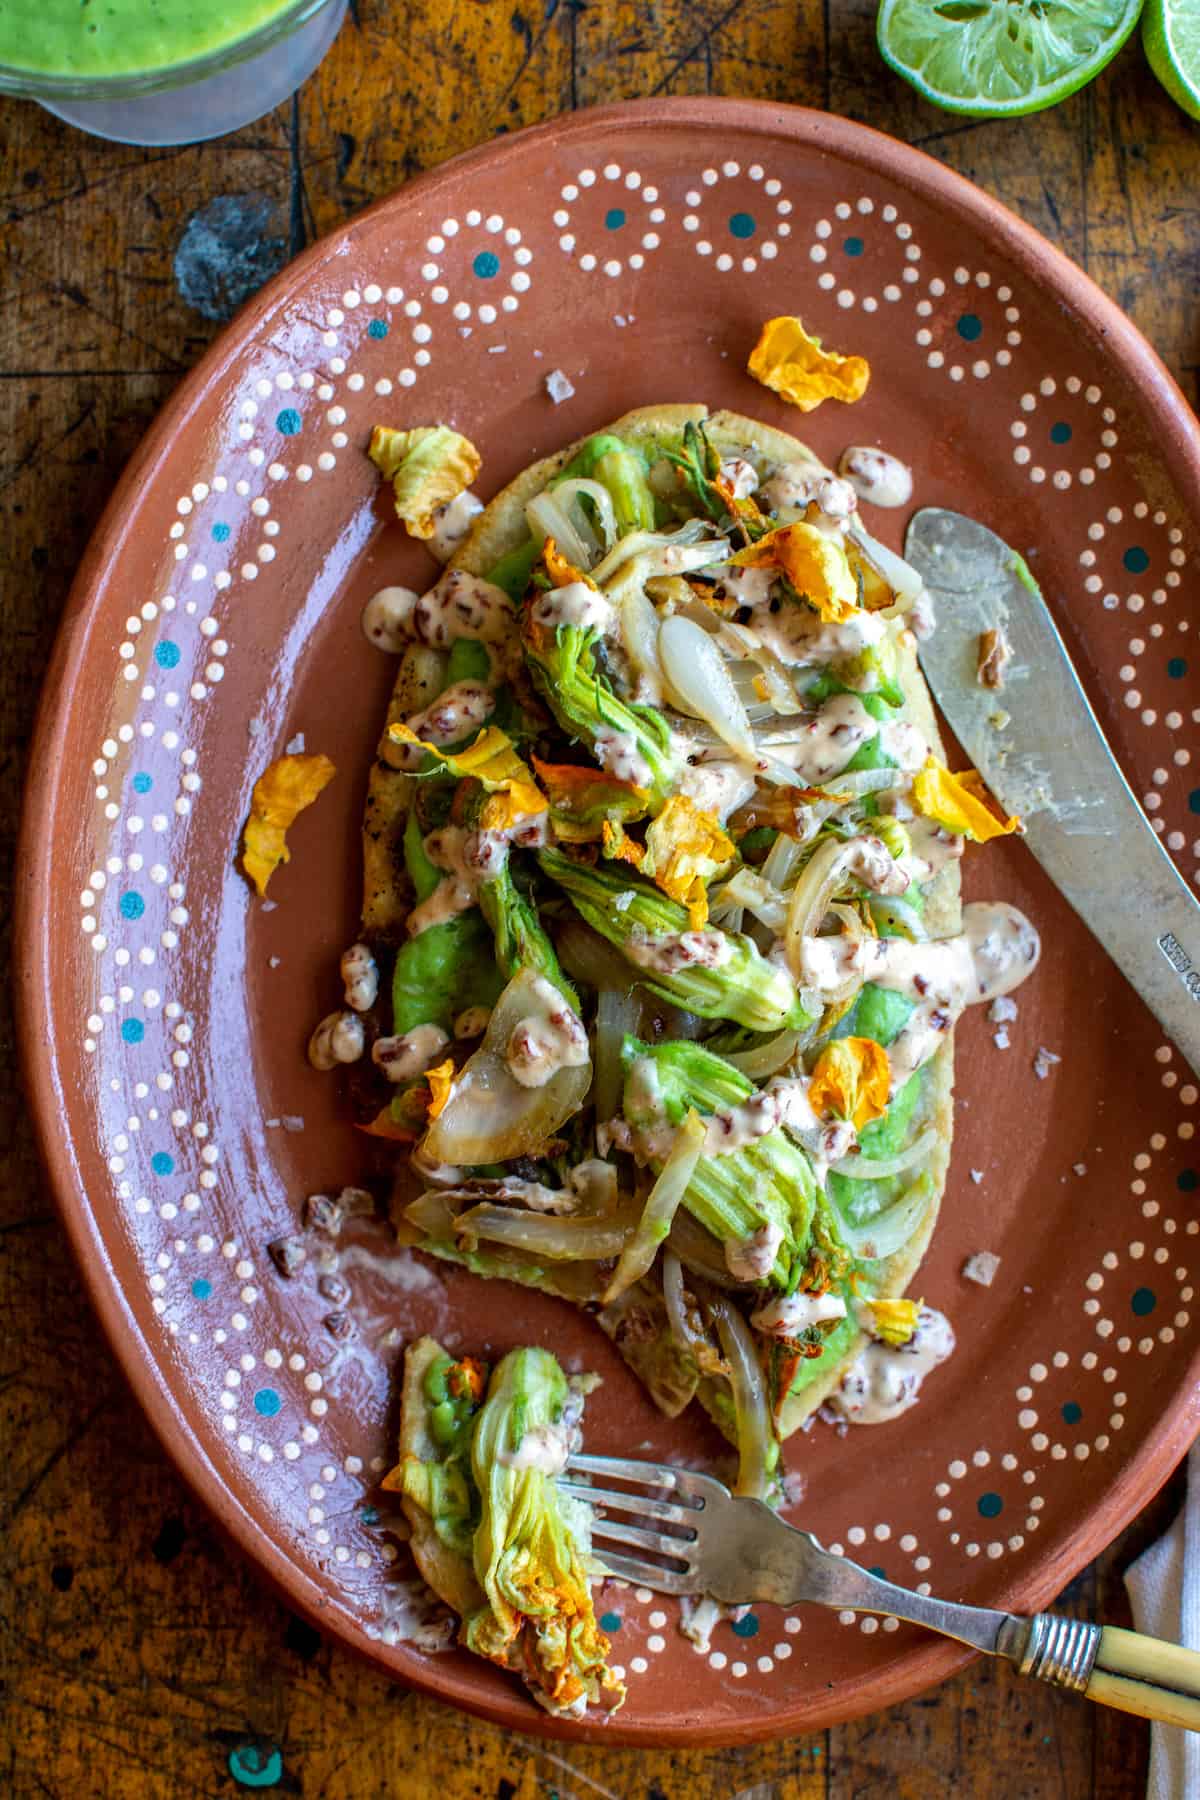 This plant-based Huaraches recipe takes you step-by-step through how to make these heavenly bean-filled masa cakes topped with tomatillo salsa, sautéed squash blossoms, and chipotle aioli. Gluten-free and vegan-adaptable! #holajalapeno #huarachesrecipe #mexicanfood #squashblossoms